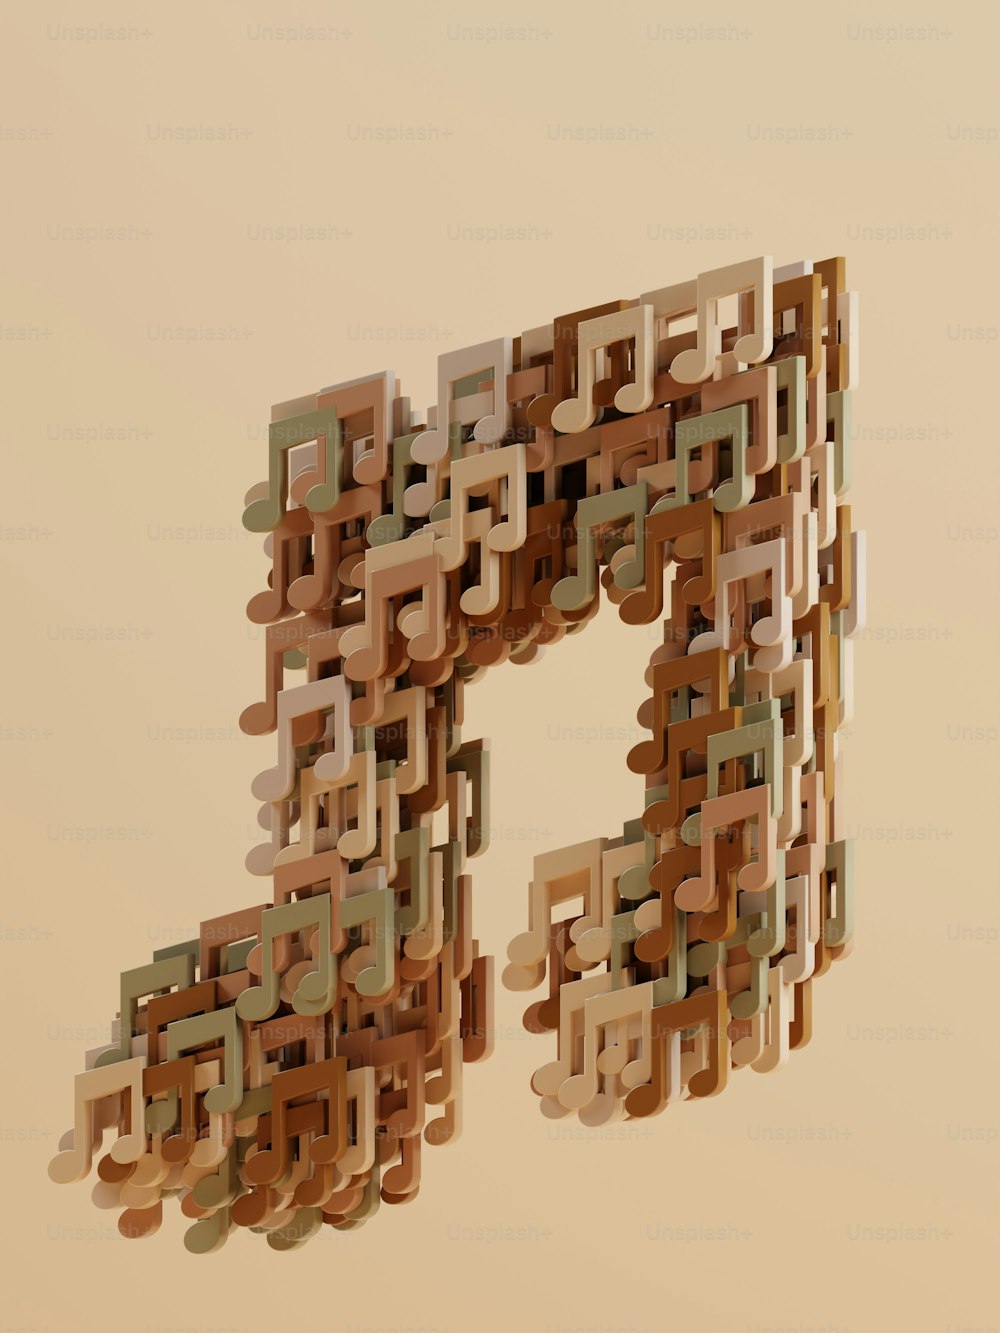 a very large letter made out of small blocks of wood